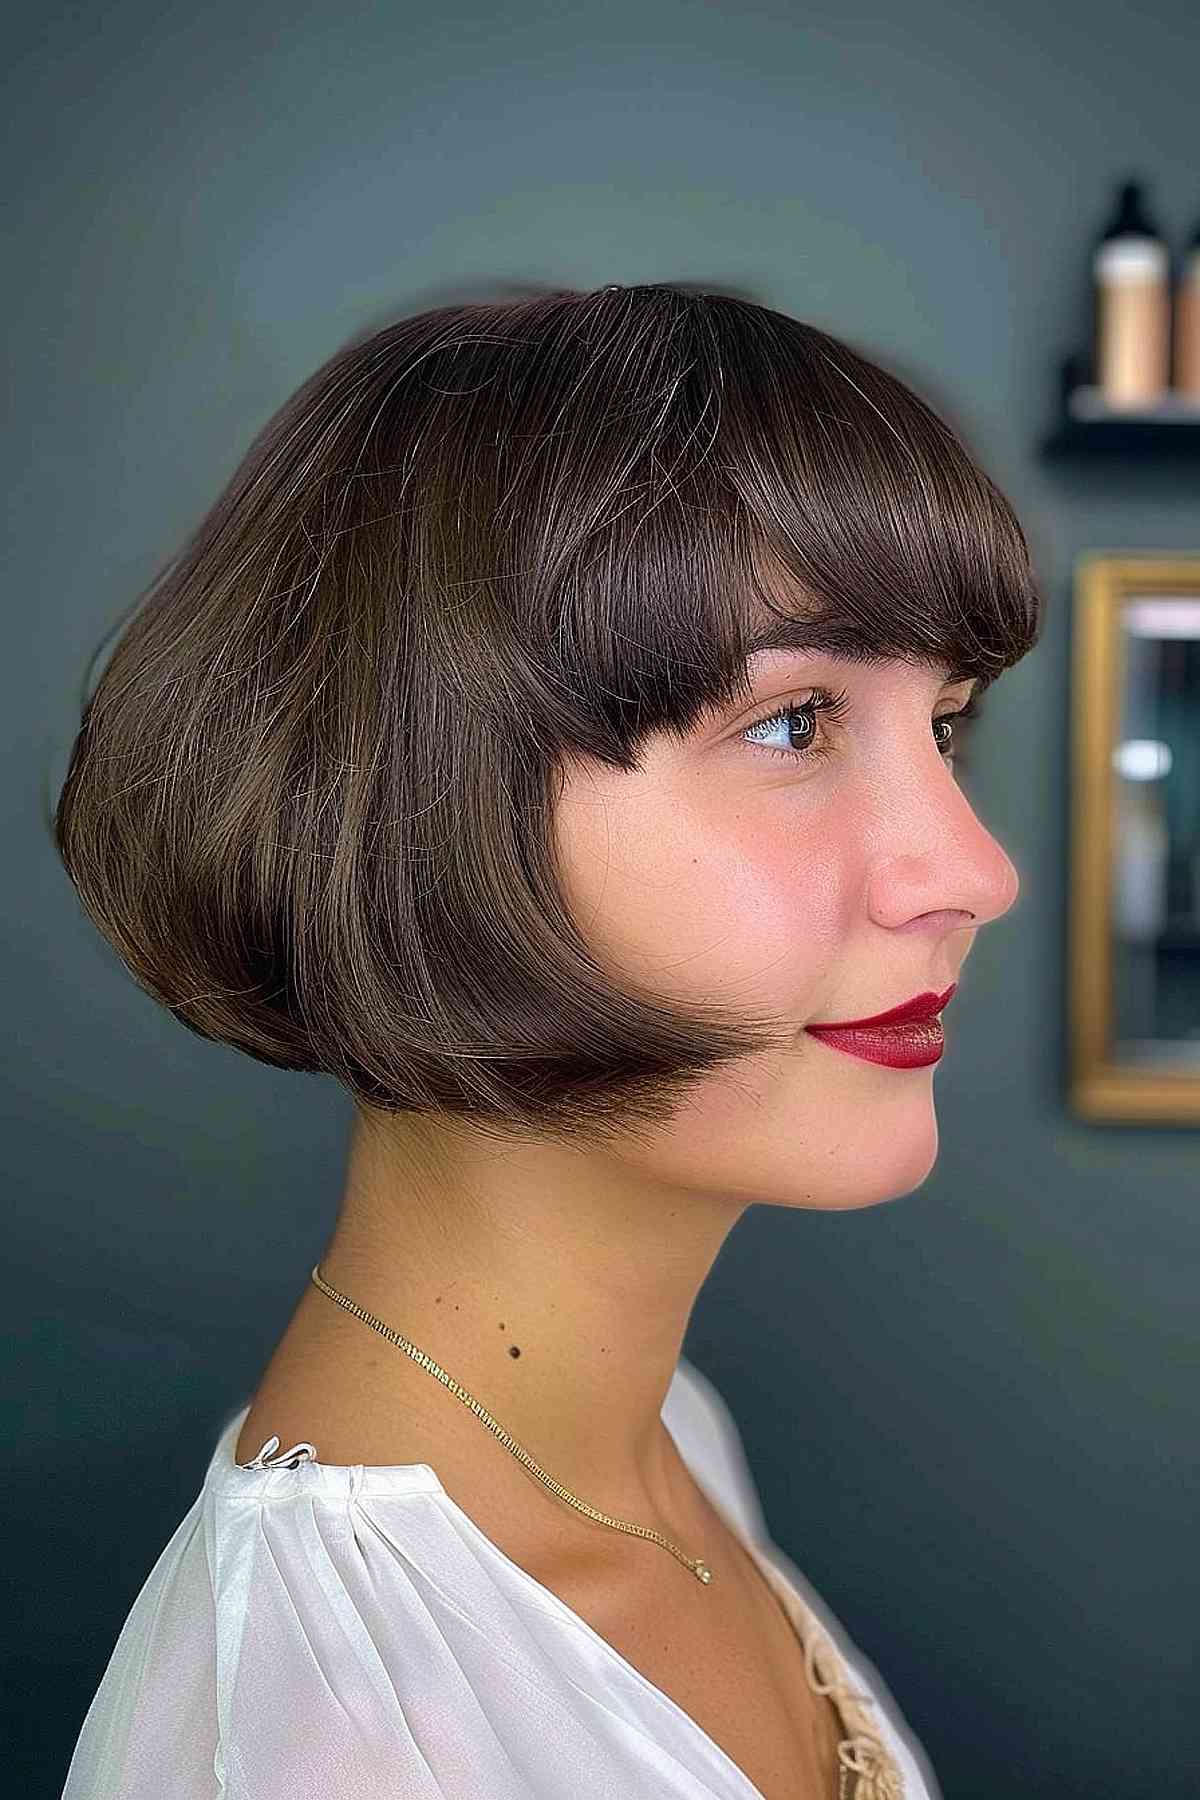 Rounded Chanel bob with full bangs offering a sleek, head-contouring look.